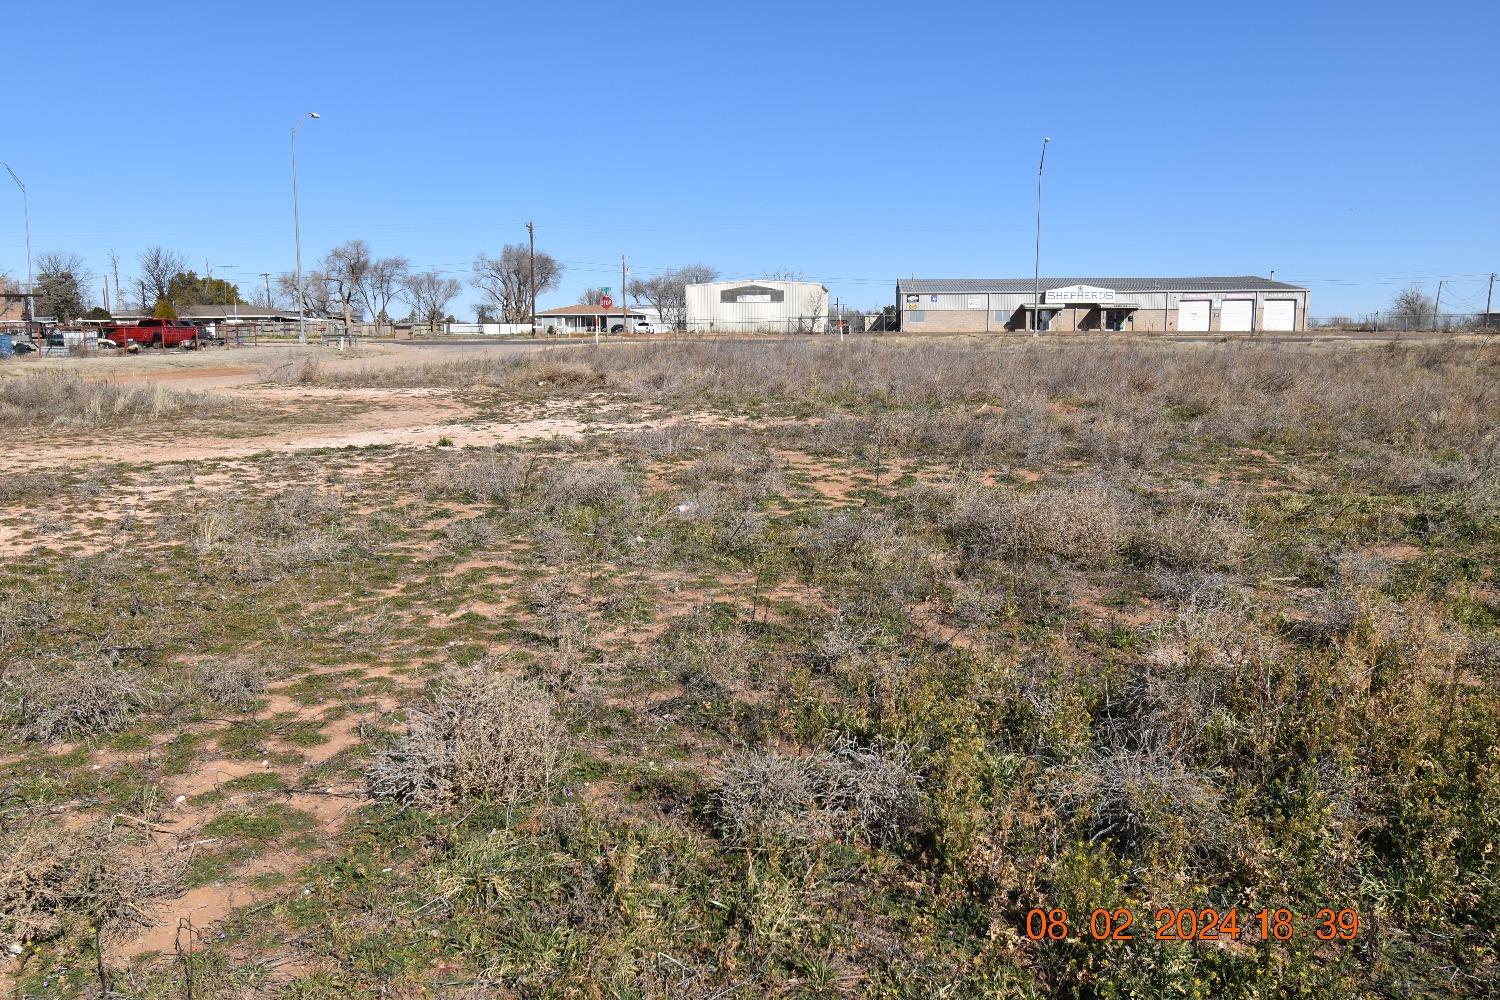 1.028 acre corner lot, partially cleared vacant land. the lot is between two residential areas with existing multi-family and single family residential housing. City water is available at the NE corner of Yuma Ave and 19th Street. Seller will subdivide.